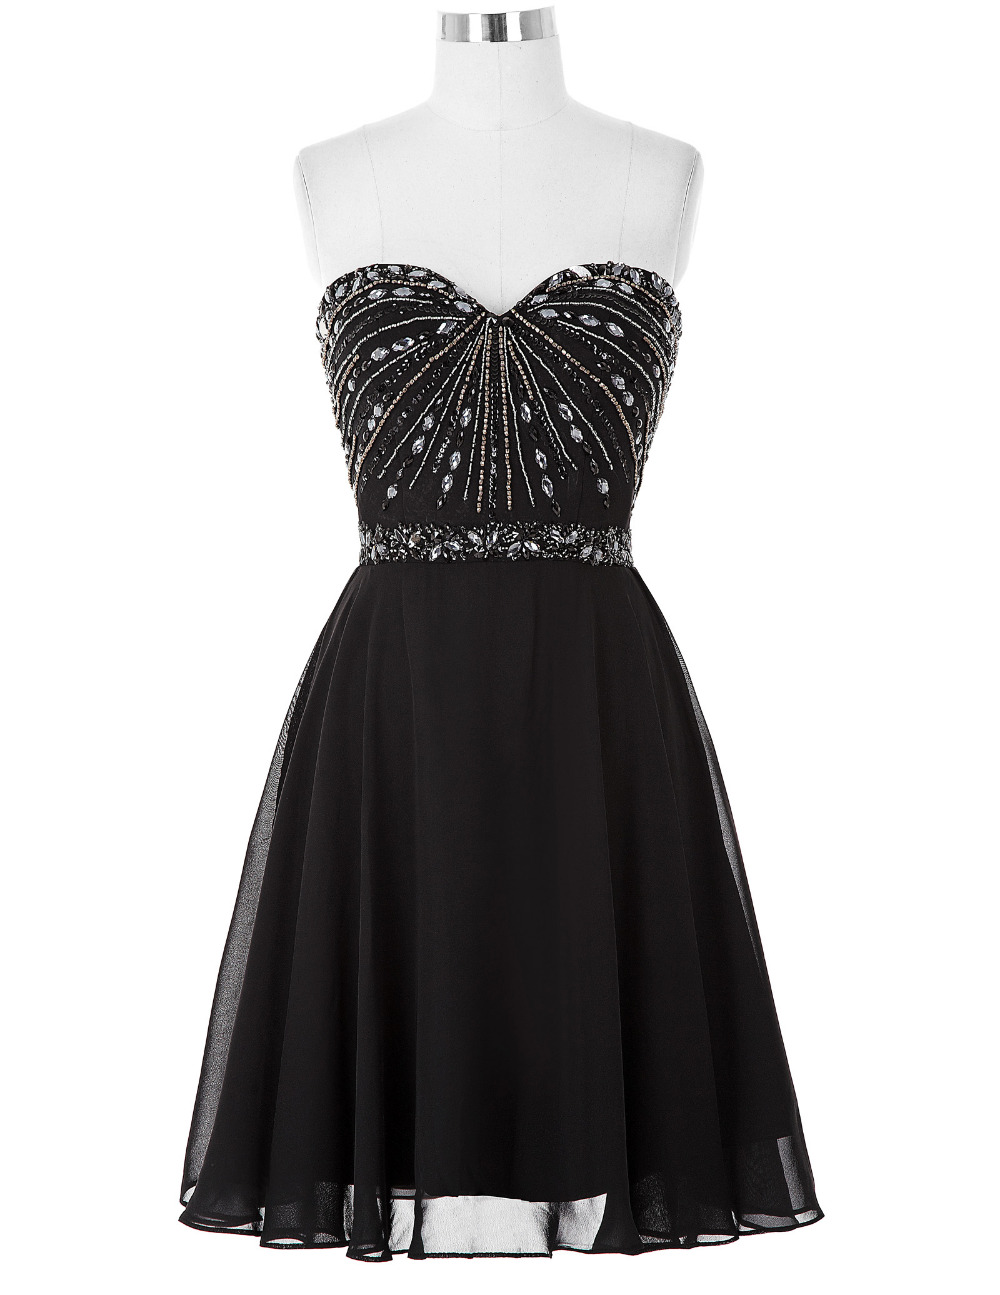 Black Chiffon Short A-line Homecoming Dress Featuring Beaded Embellished Sweetheart Bodice And Lace-up Back